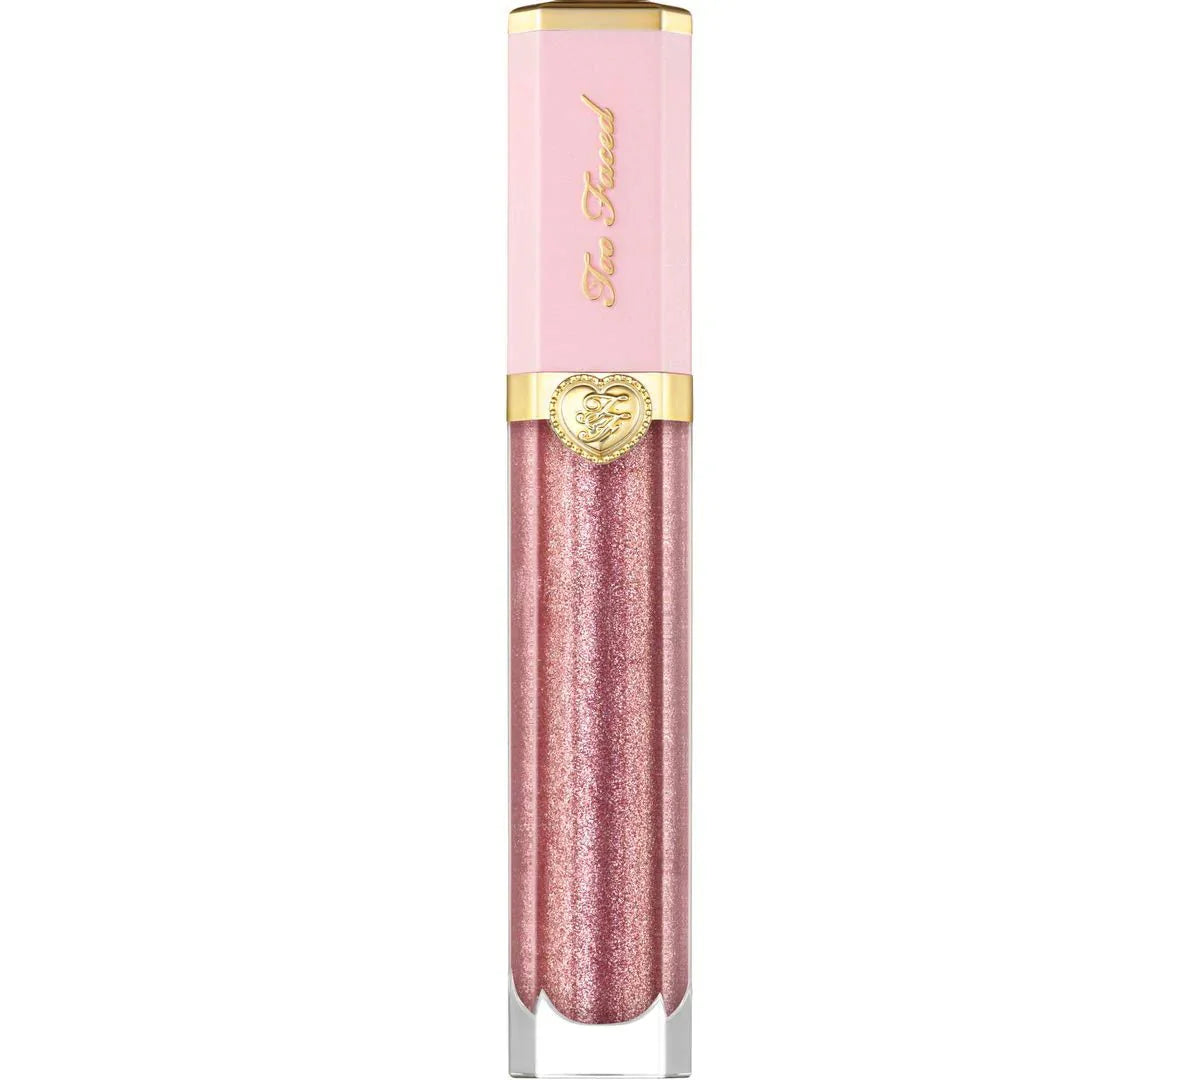 Too Faced  Too Faced Rich & Dazzling High Shine Sparkling Lip Gloss - Raisin The Roof